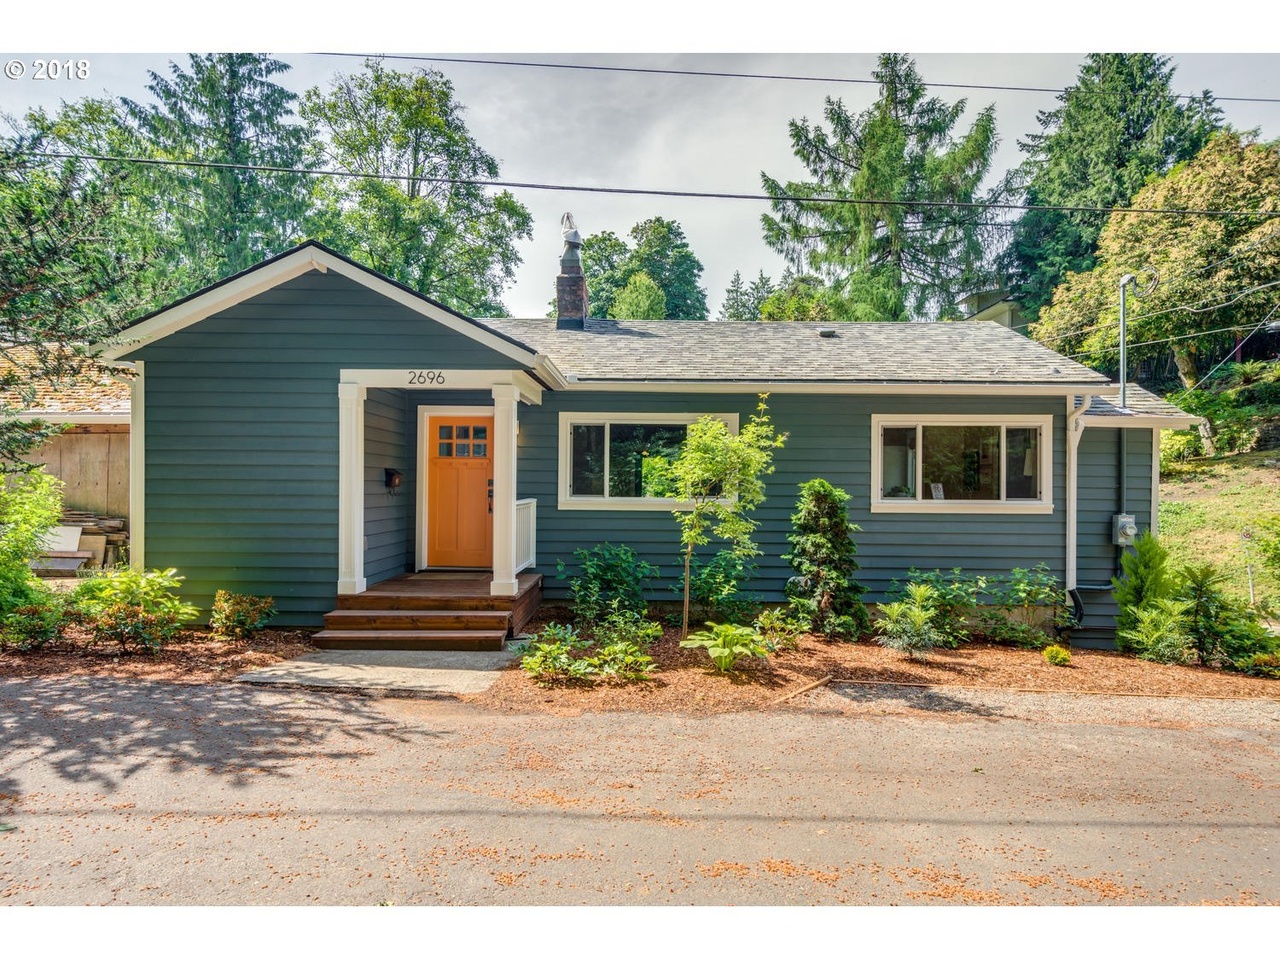 2696 SW Gerald Ave, Portland, OR 97201 | MLS# 18473291 | Redfin